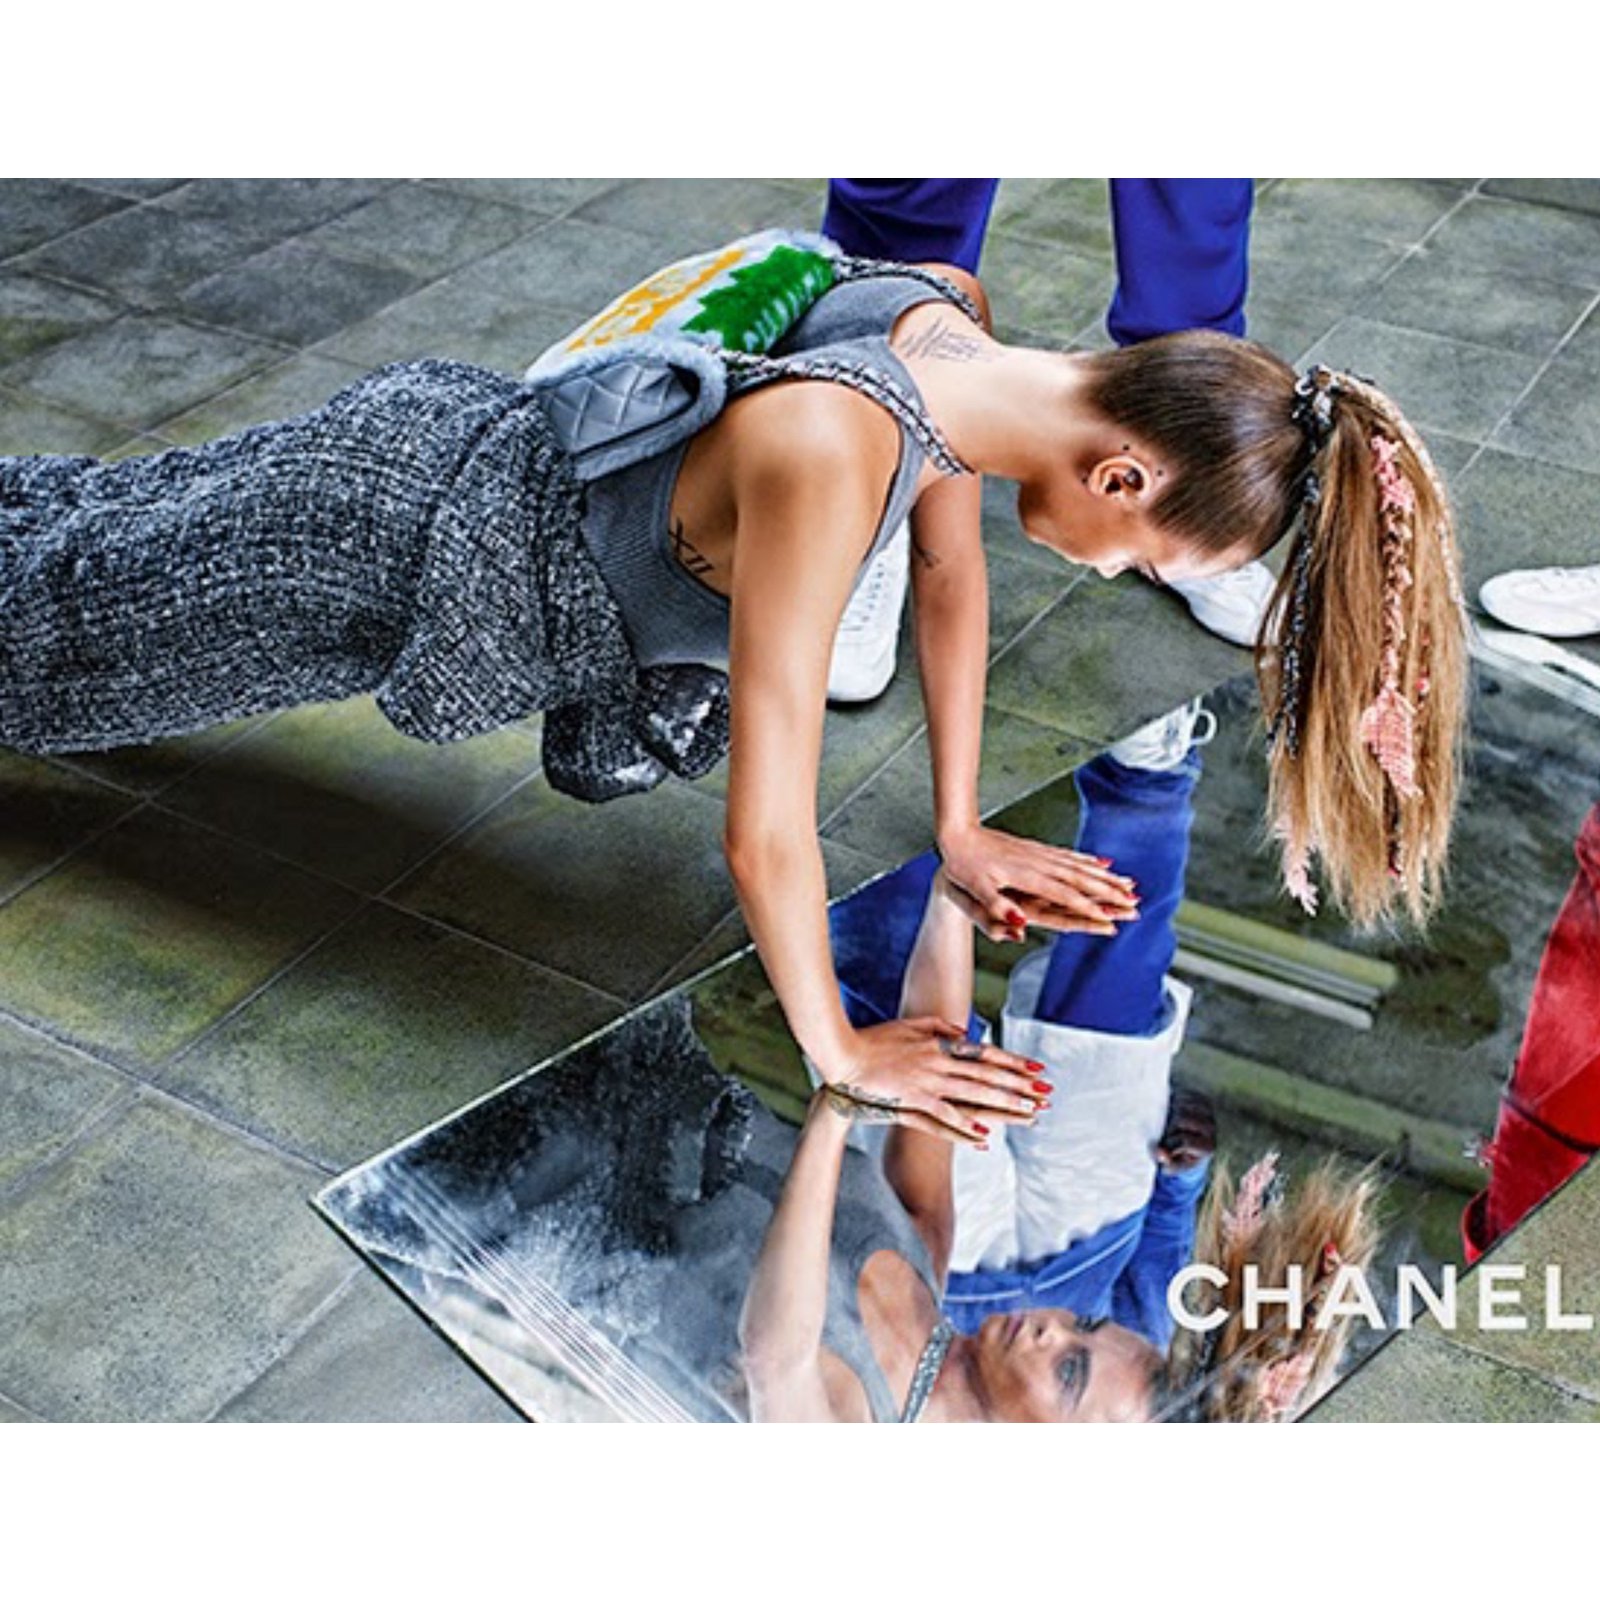 50 More Photos That Prove Chanel Bags Are The Reigning Celebrity Favorites  PurseBlog